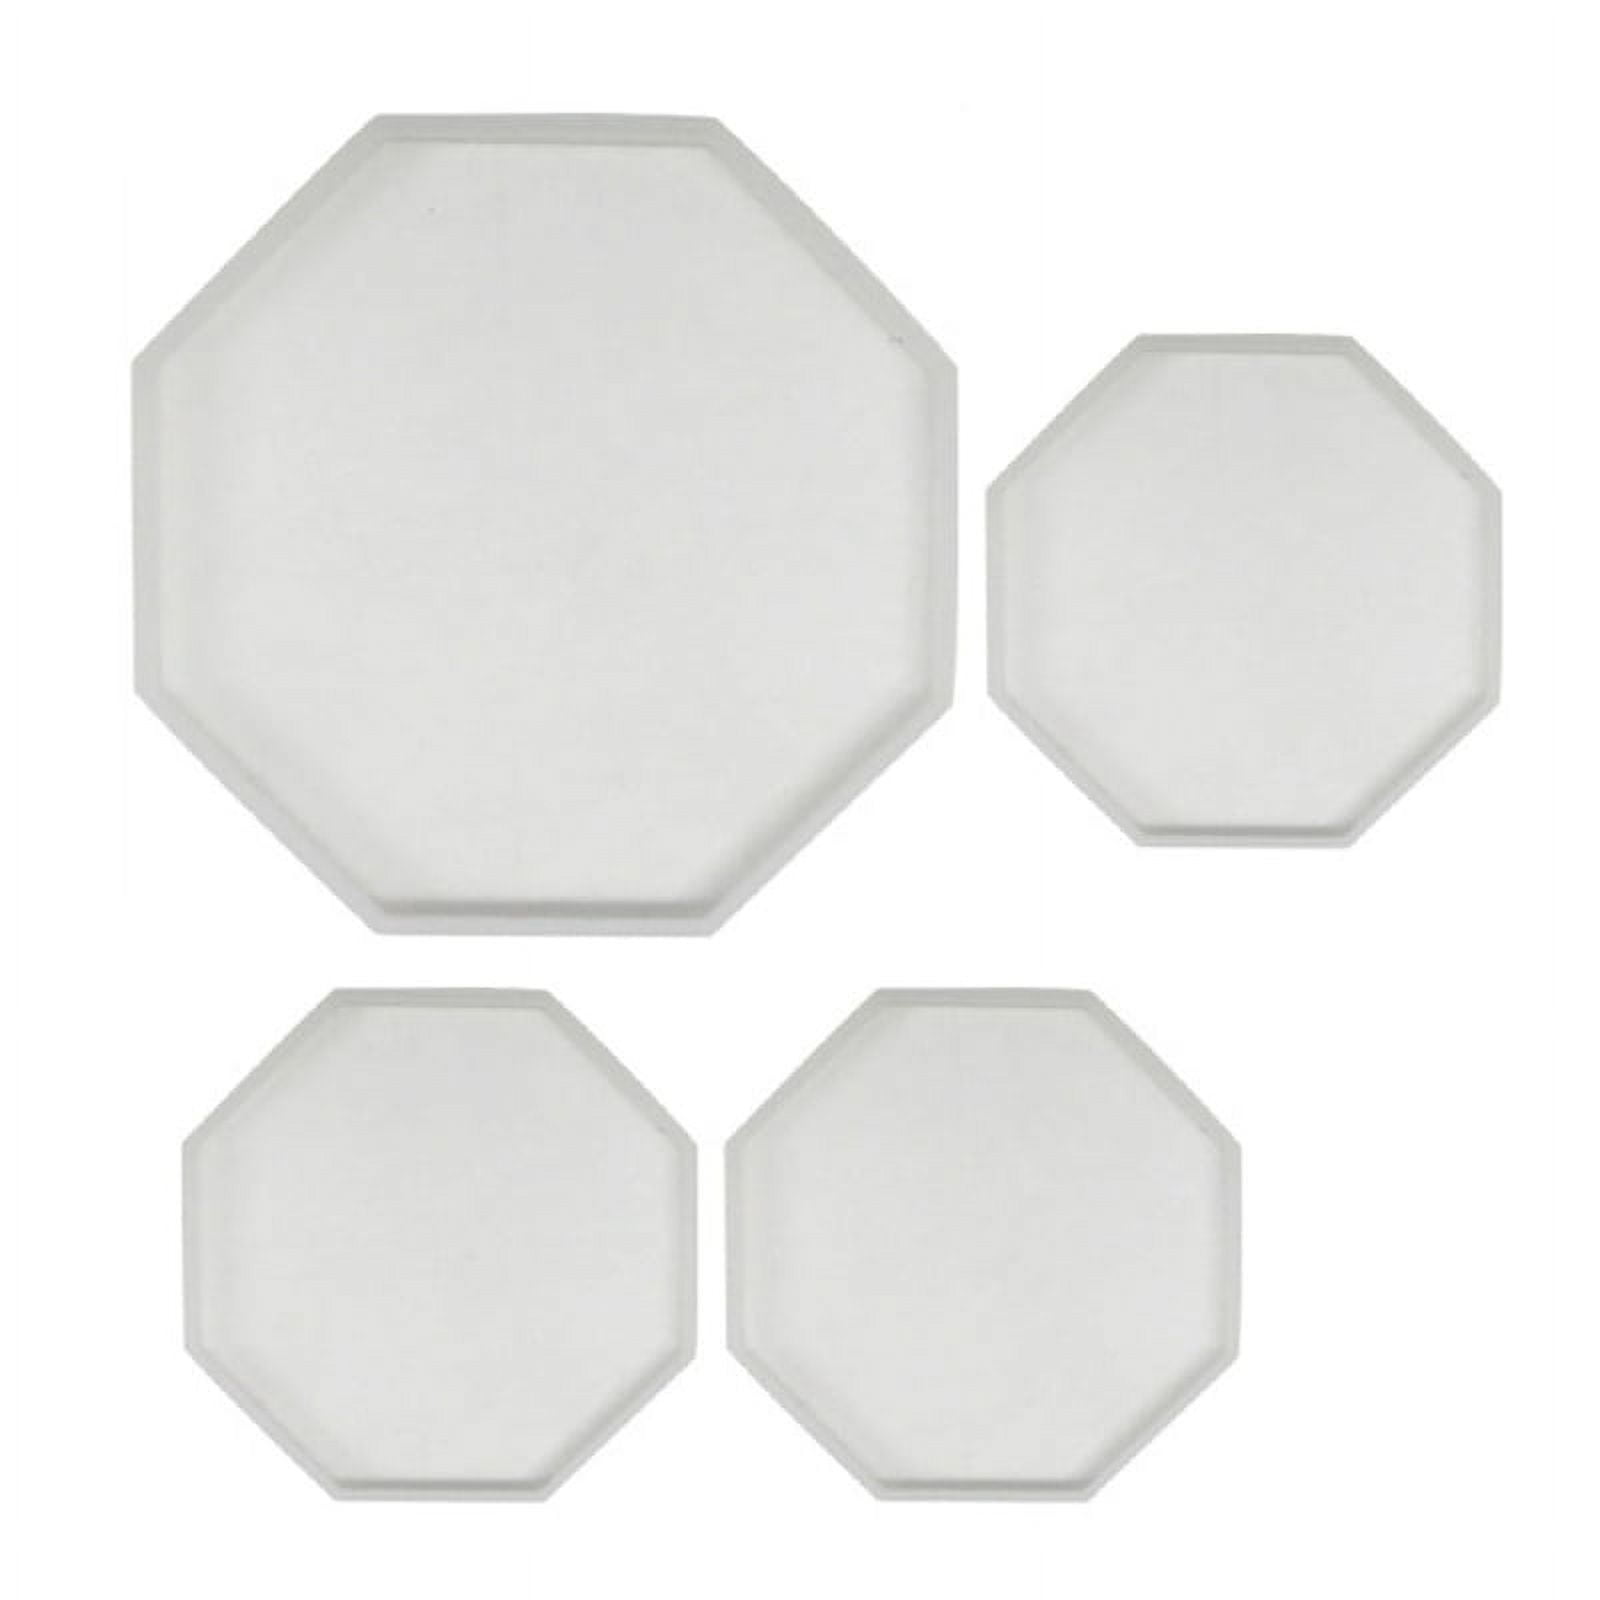 Hexagon Silicone Coaster Mold-silicone Mold for Resin Coaster-craft Resin  Molds-octagon Silicon Cup Mat Mold-jewelry Tray Mold 